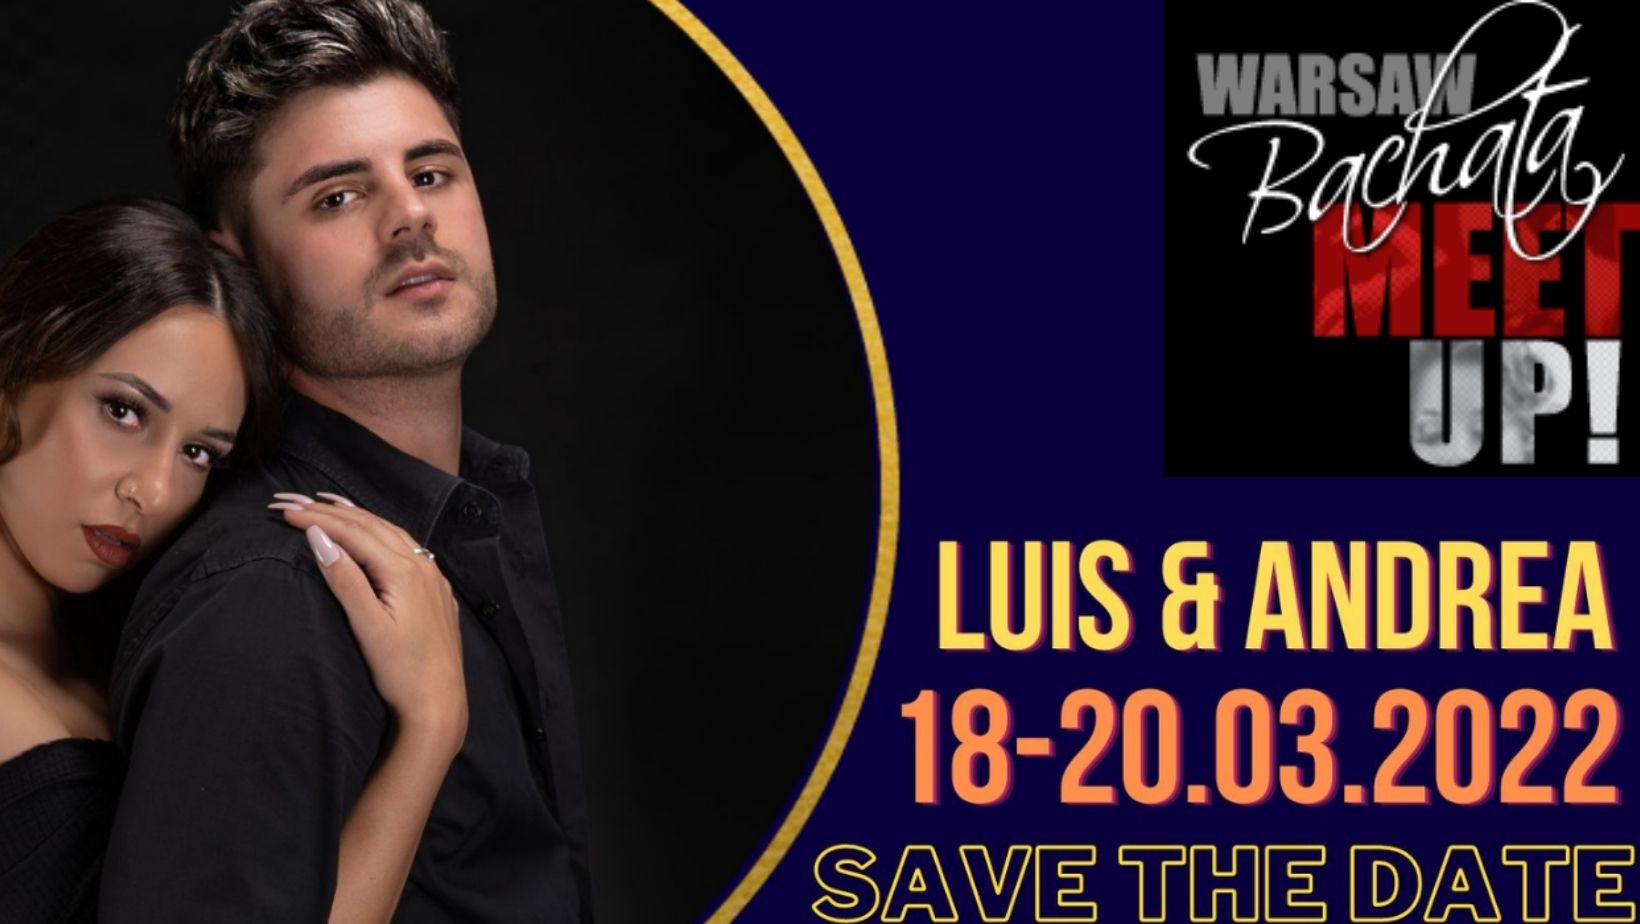 Warsaw Bachata Meet Up!  - the best bachata festivals of  Europe